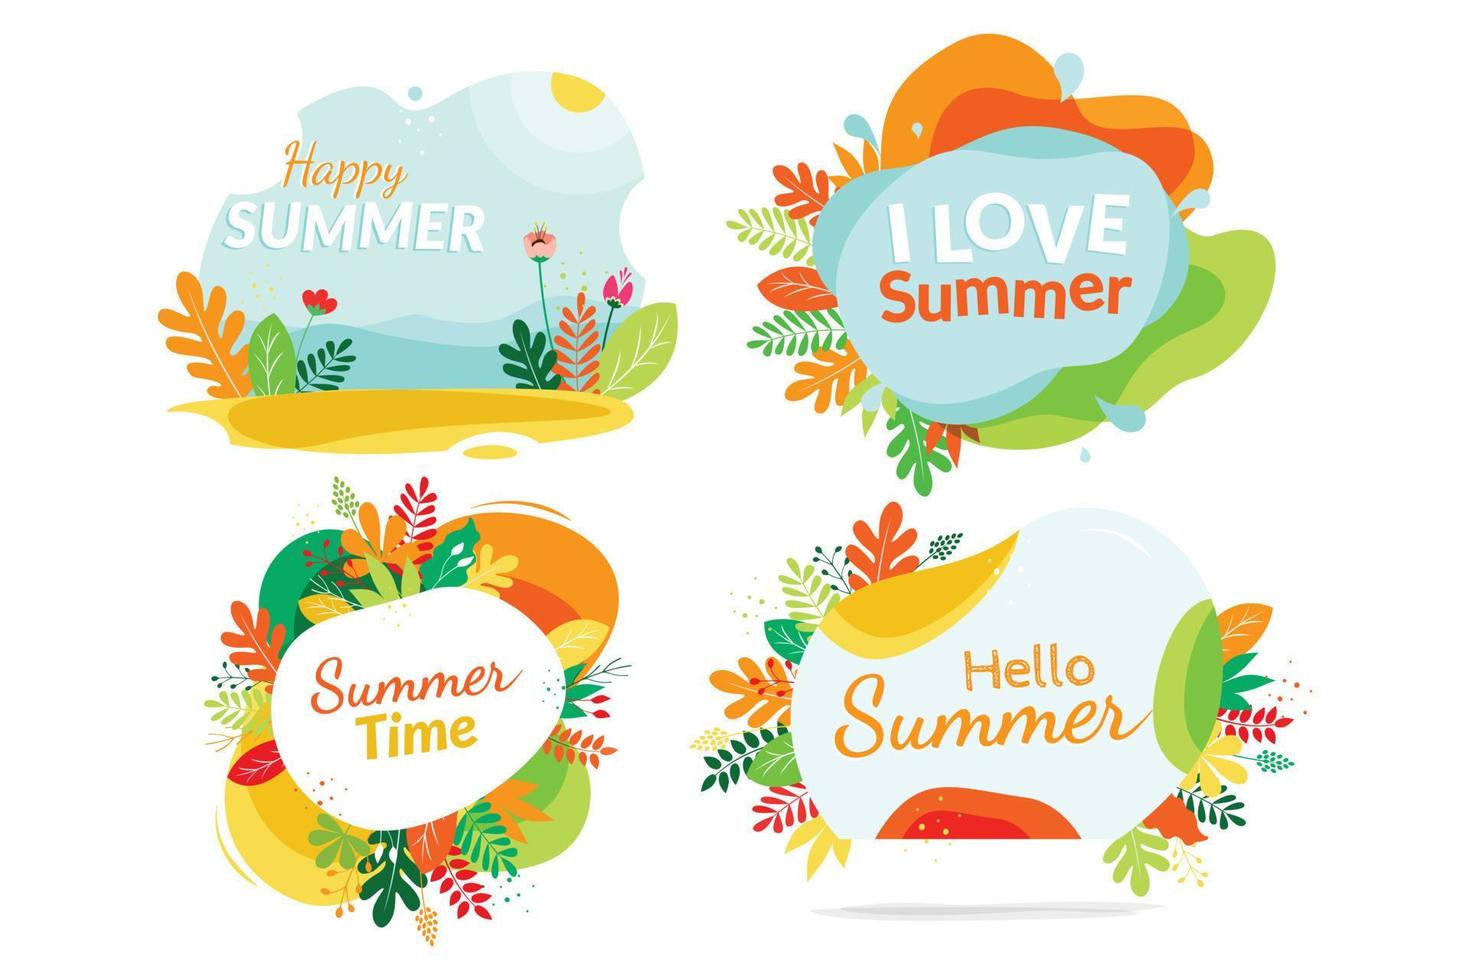 Summer Season Greeting Banner Decorsted by Bright Leaves Illustration vector